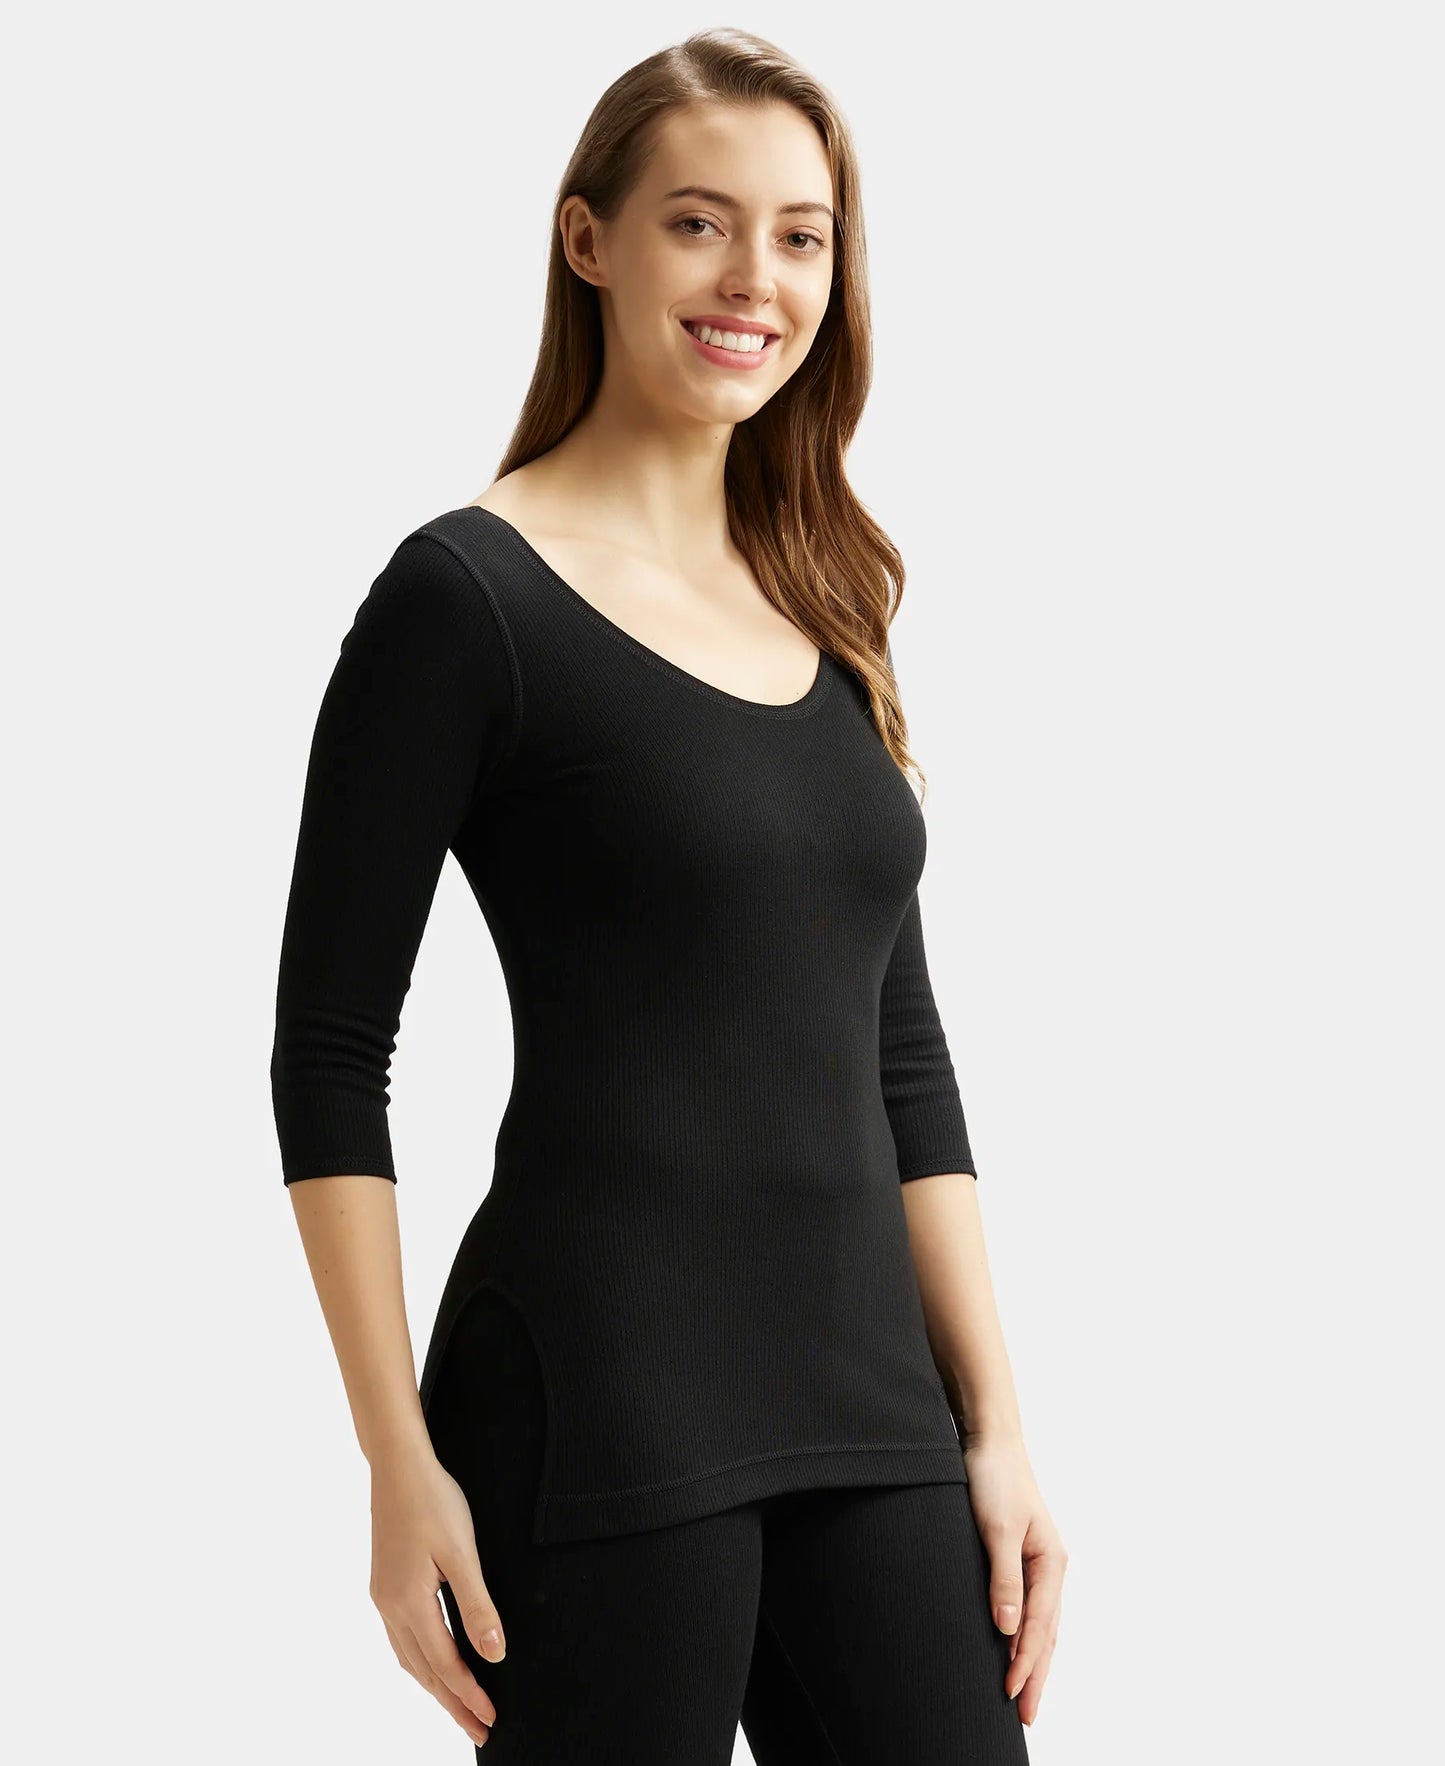 Super Combed Cotton Rich Three Quarter Sleeve Thermal Top with StayWarm Technology - Black-2